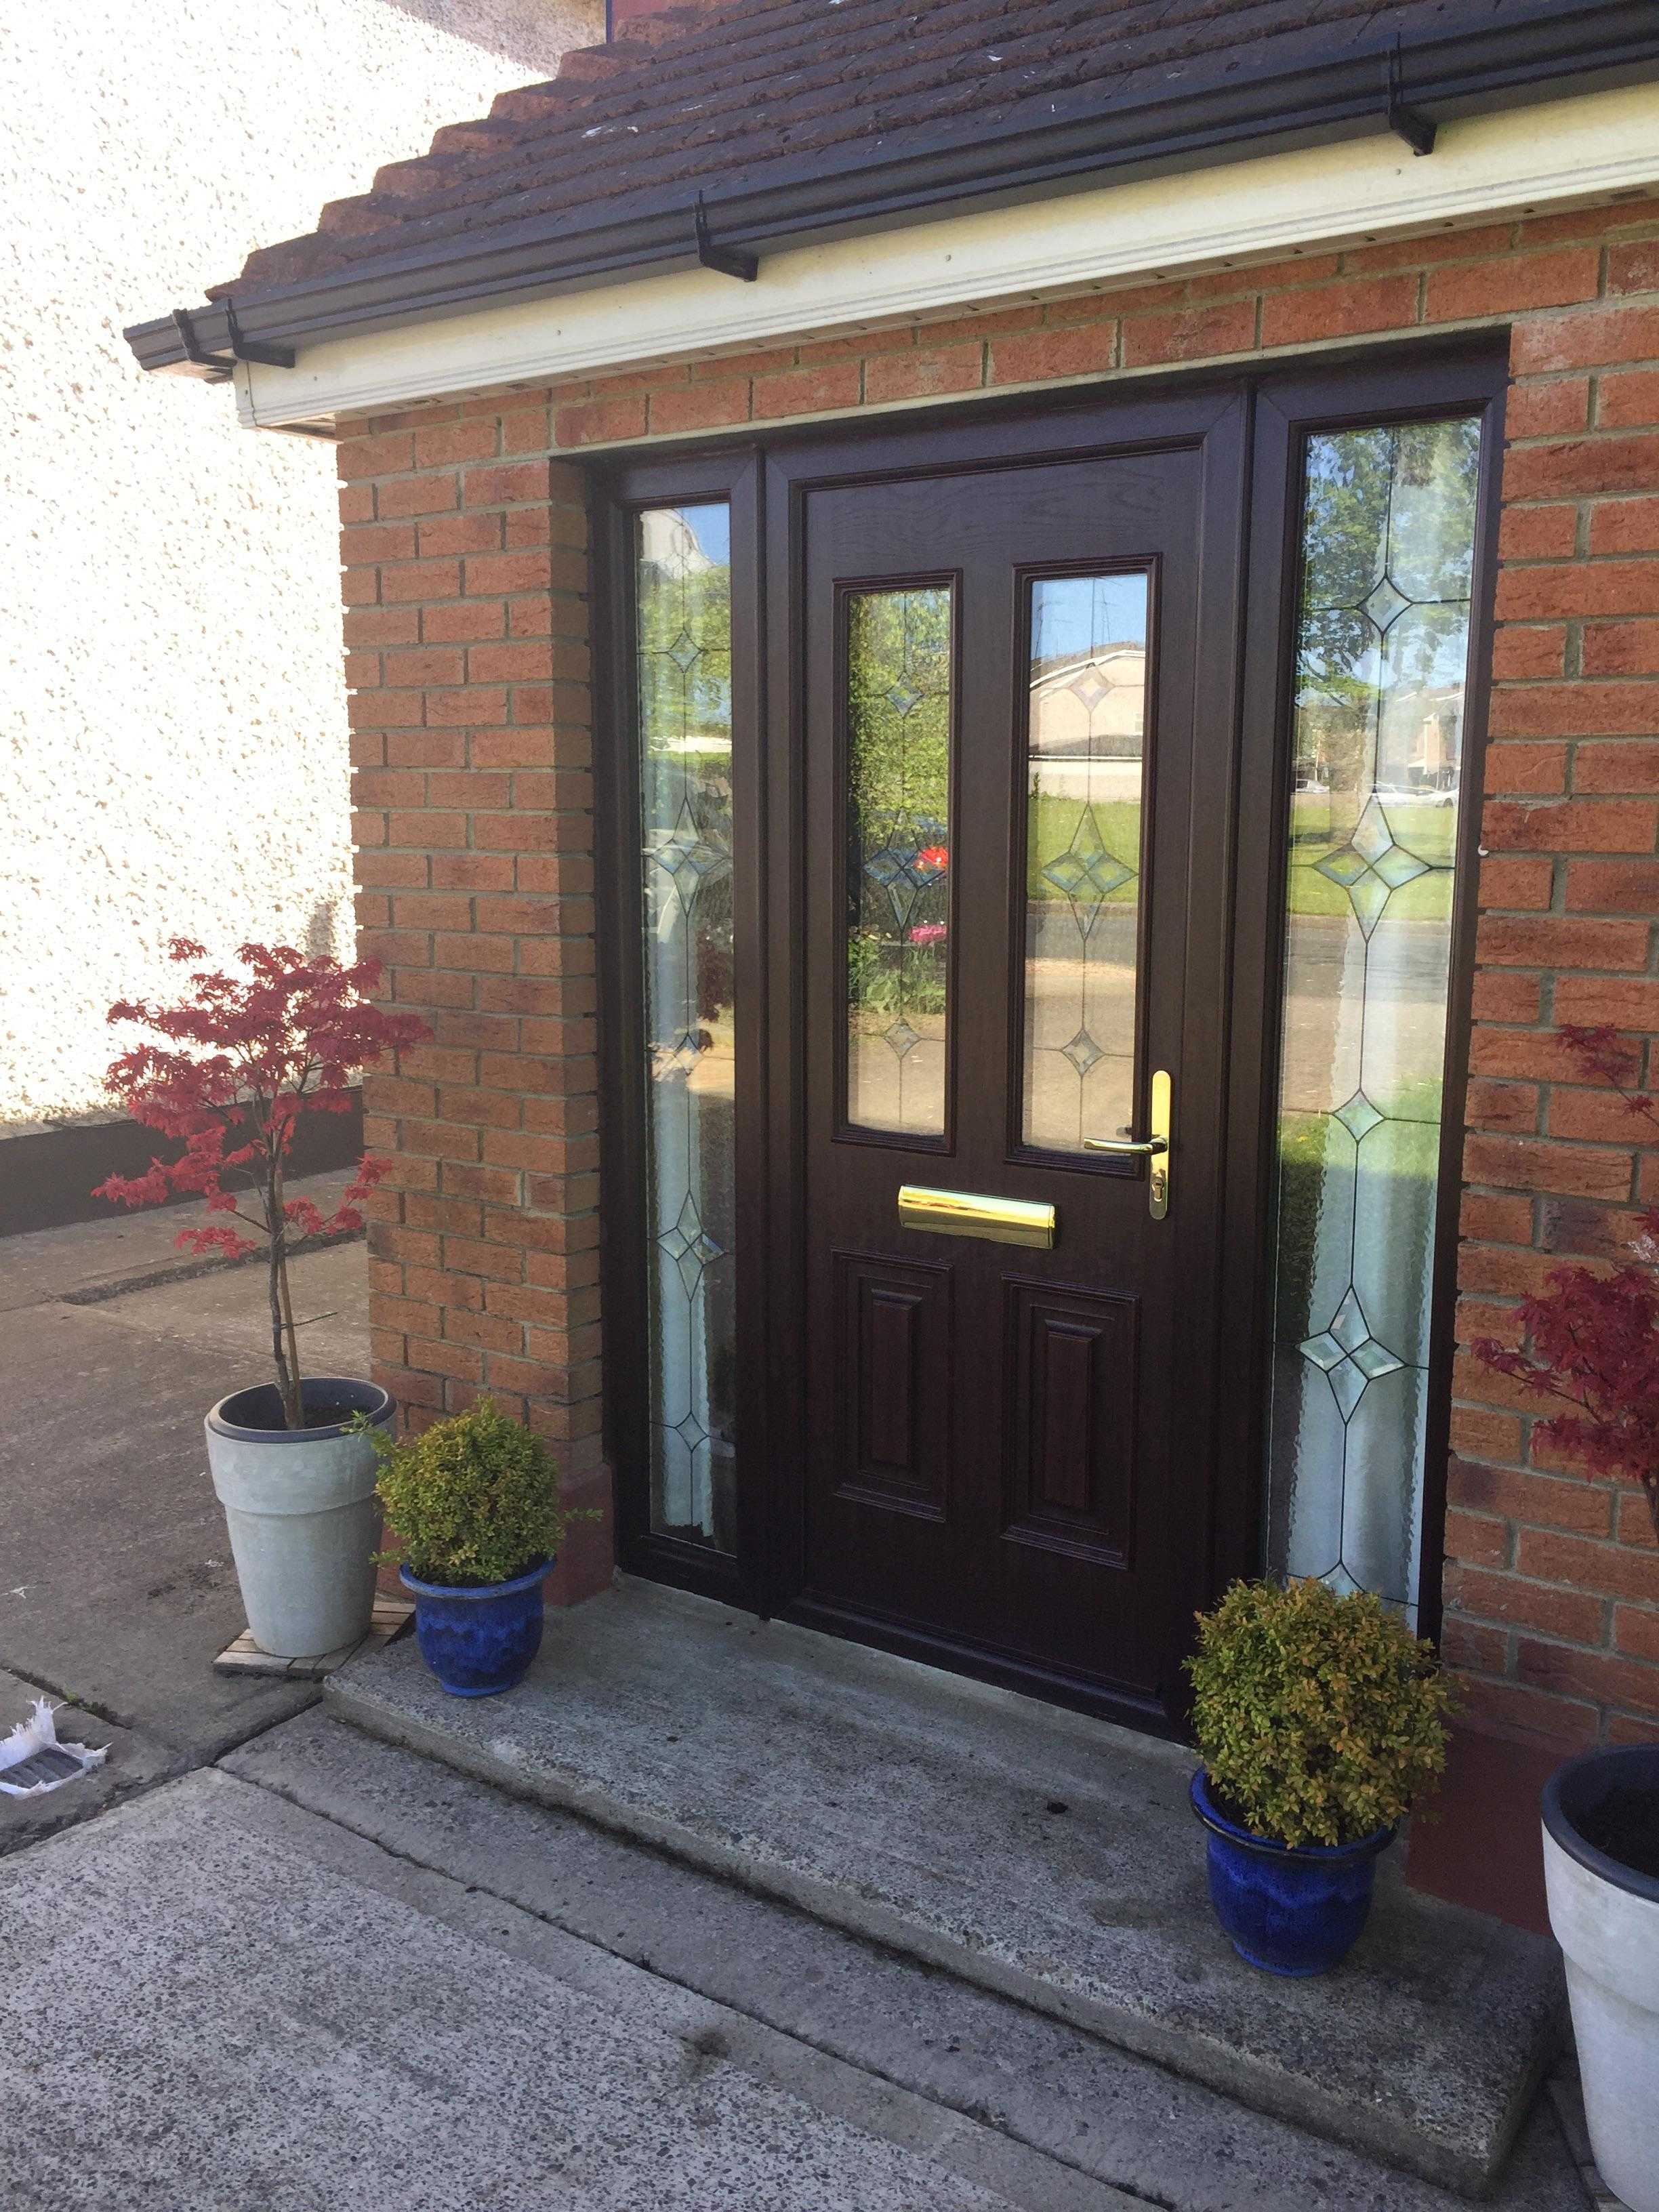 ROSEWOOD PALLADIO PALMERO COMPOSITE FRONT DOOR FITTED BY ASGARD WINDOWS.